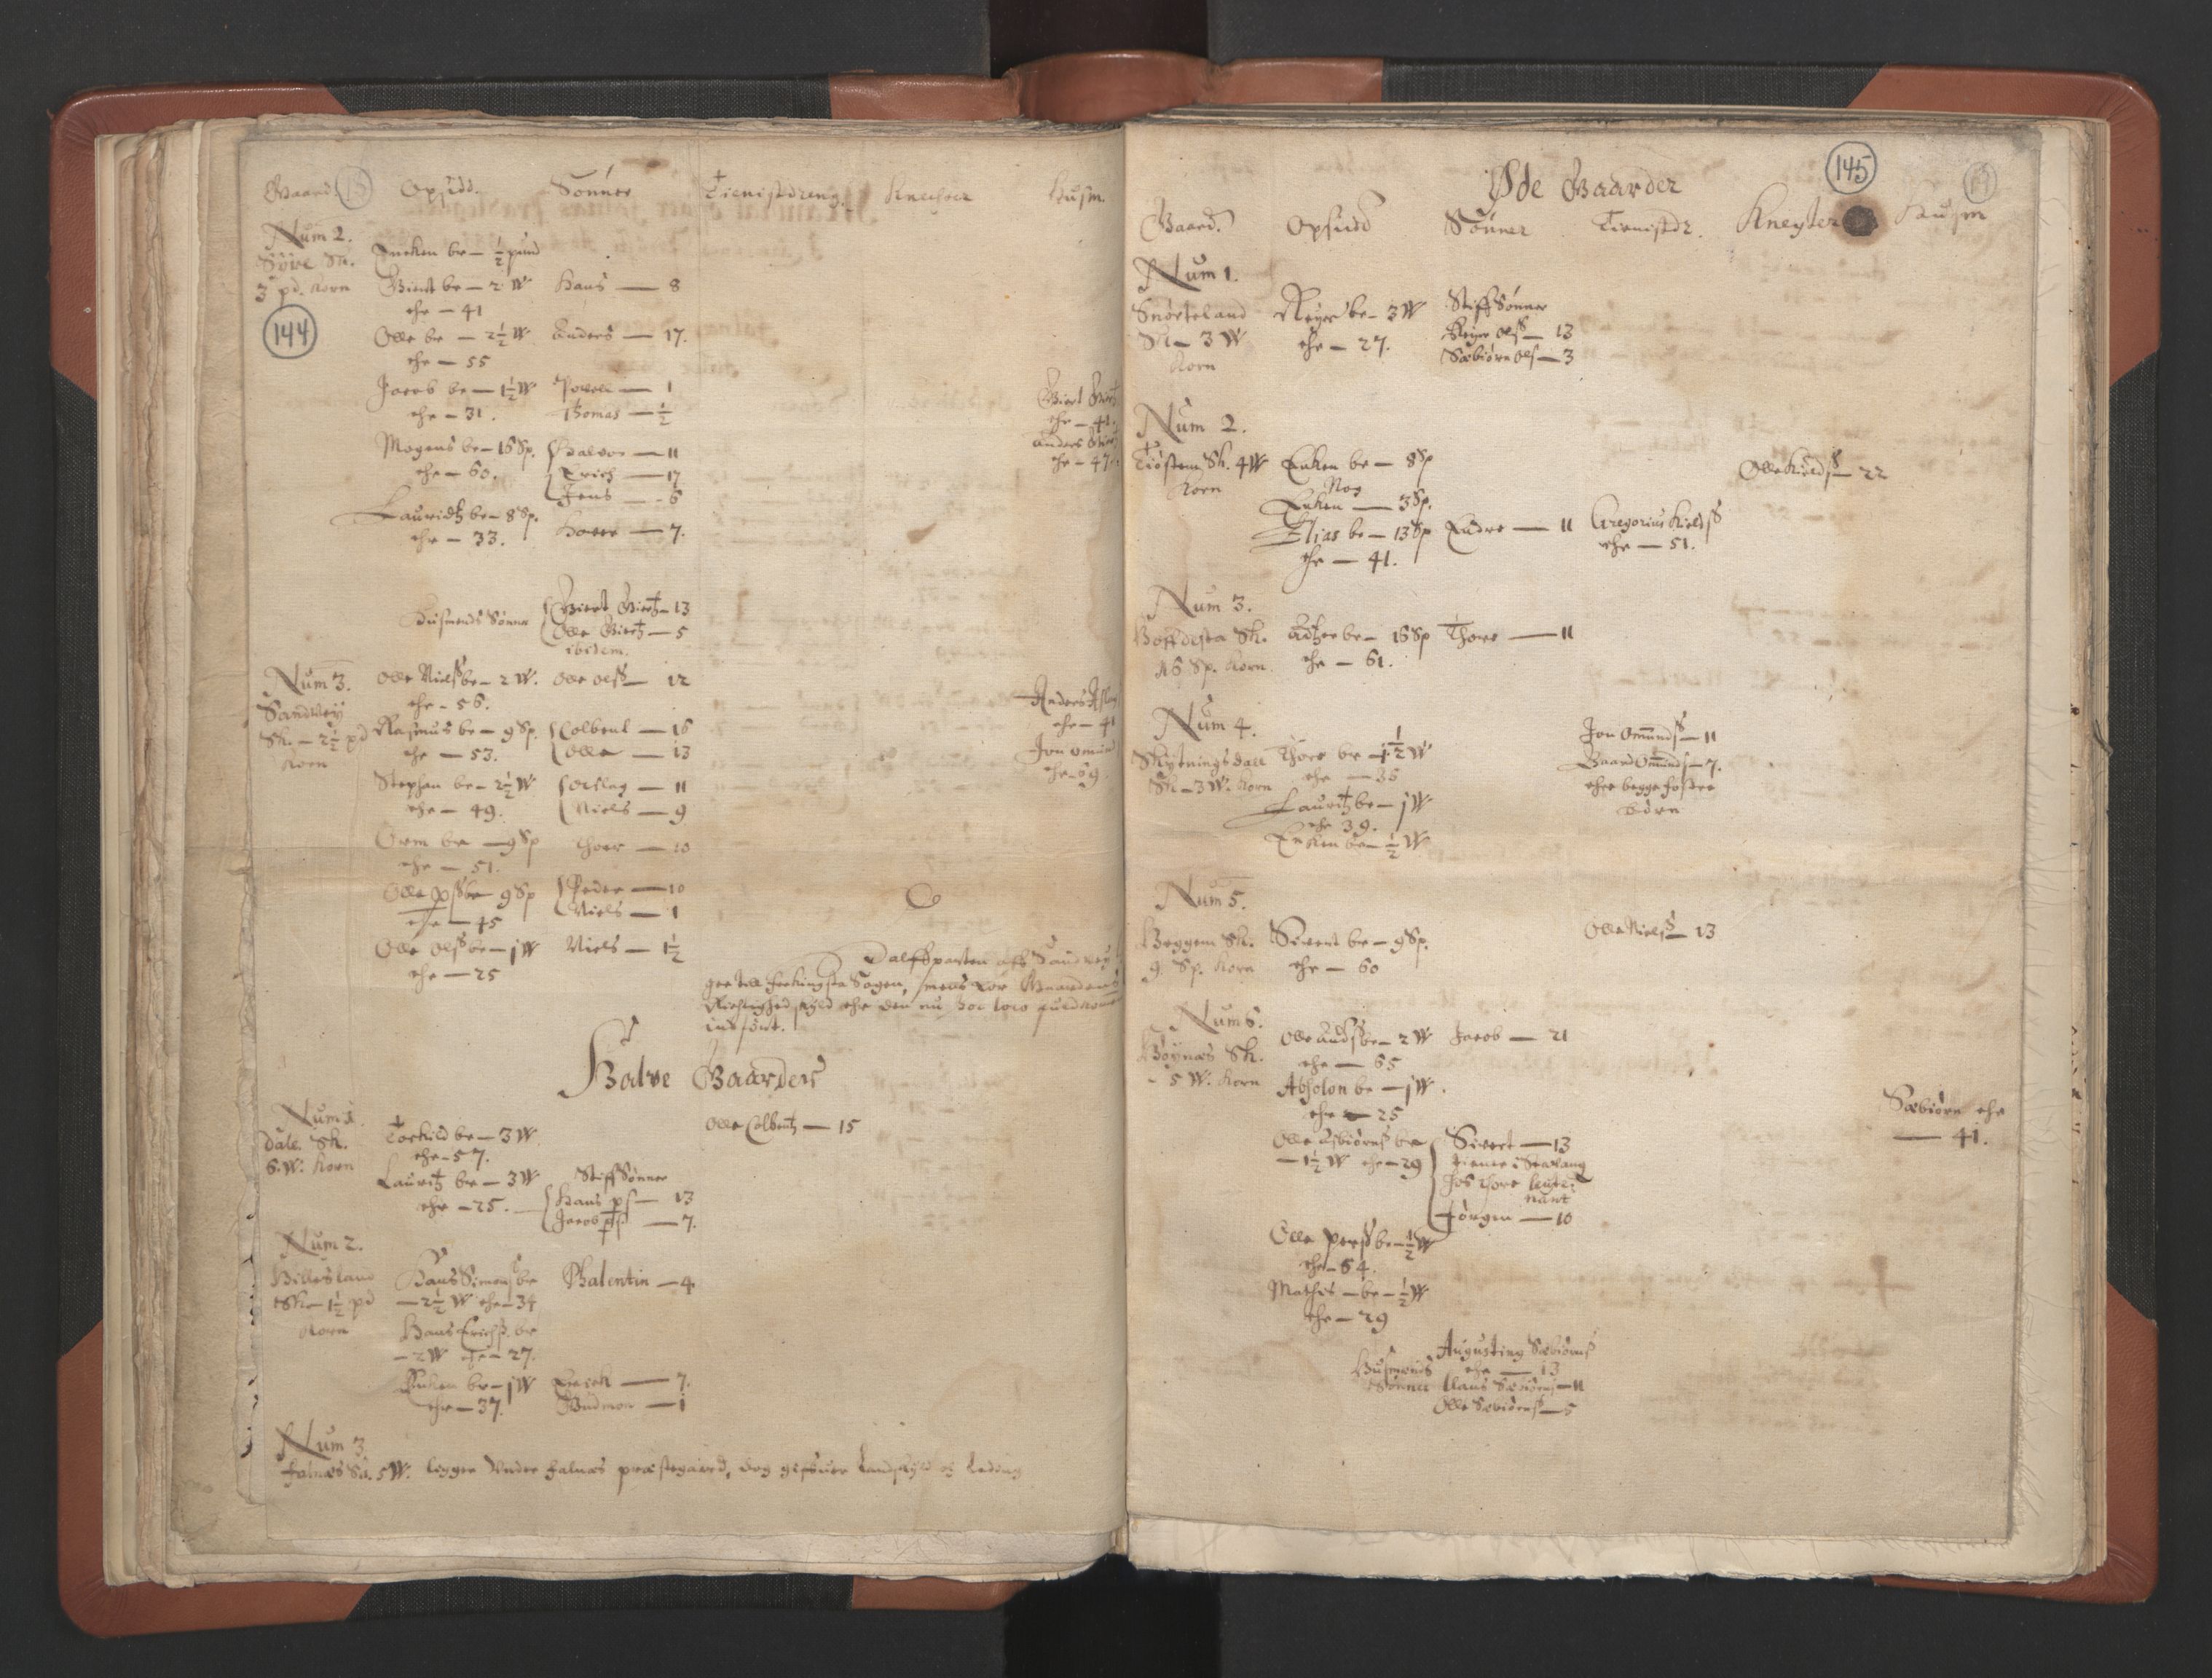 RA, Vicar's Census 1664-1666, no. 18: Stavanger deanery and Karmsund deanery, 1664-1666, p. 144-145